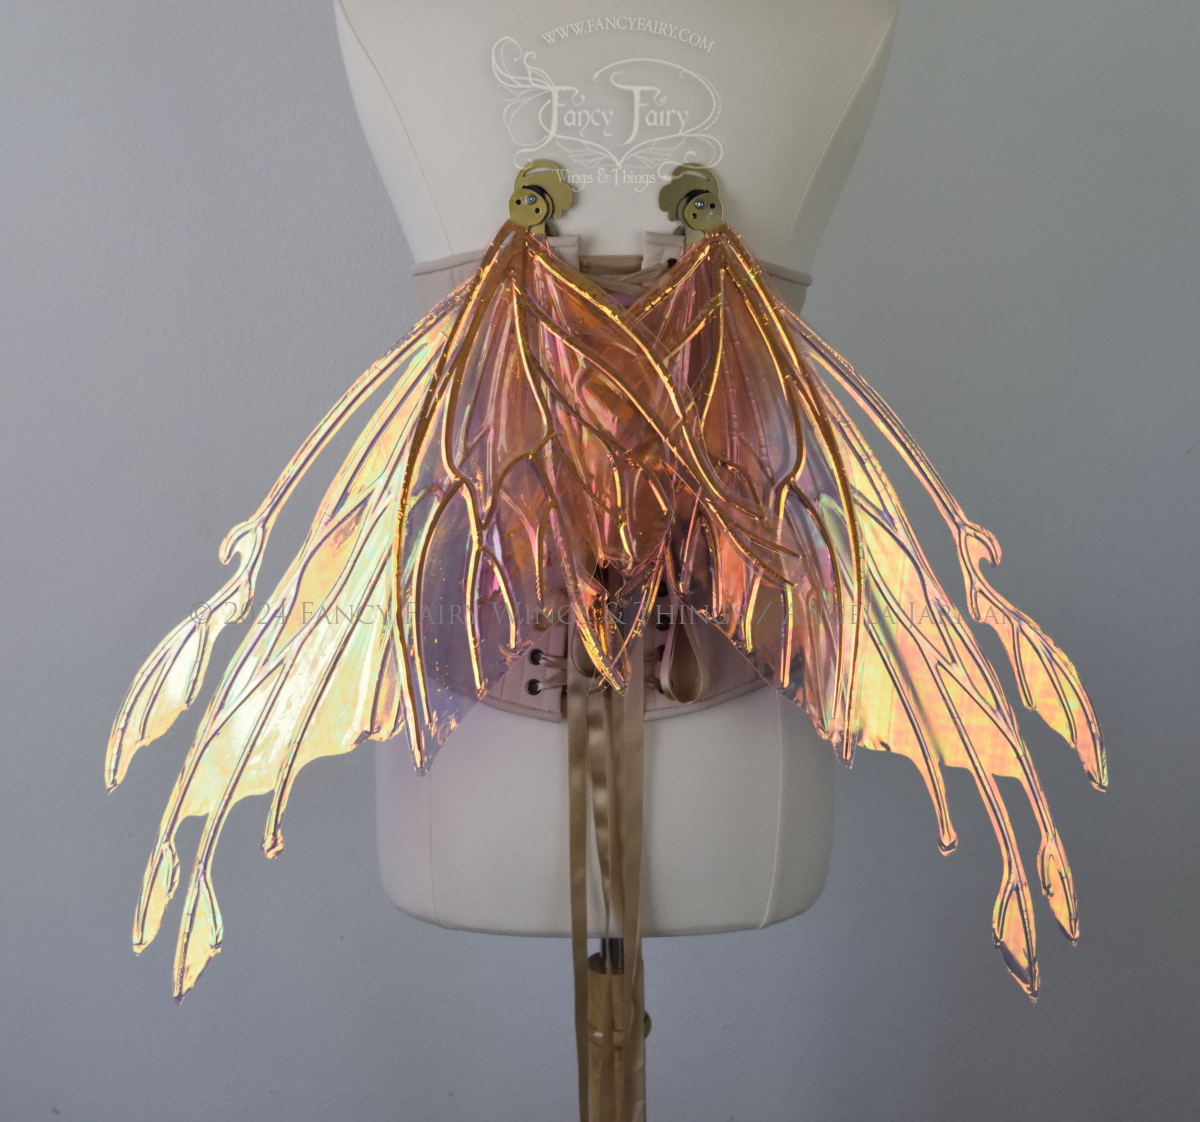 Back view of an ivory dress form wearing an alabaster underbust corset & large pink & orange iridescent fairy wings with elongated upper panels with petal like appendages at the tips & antennae, the veins are gold, wings are in resting position